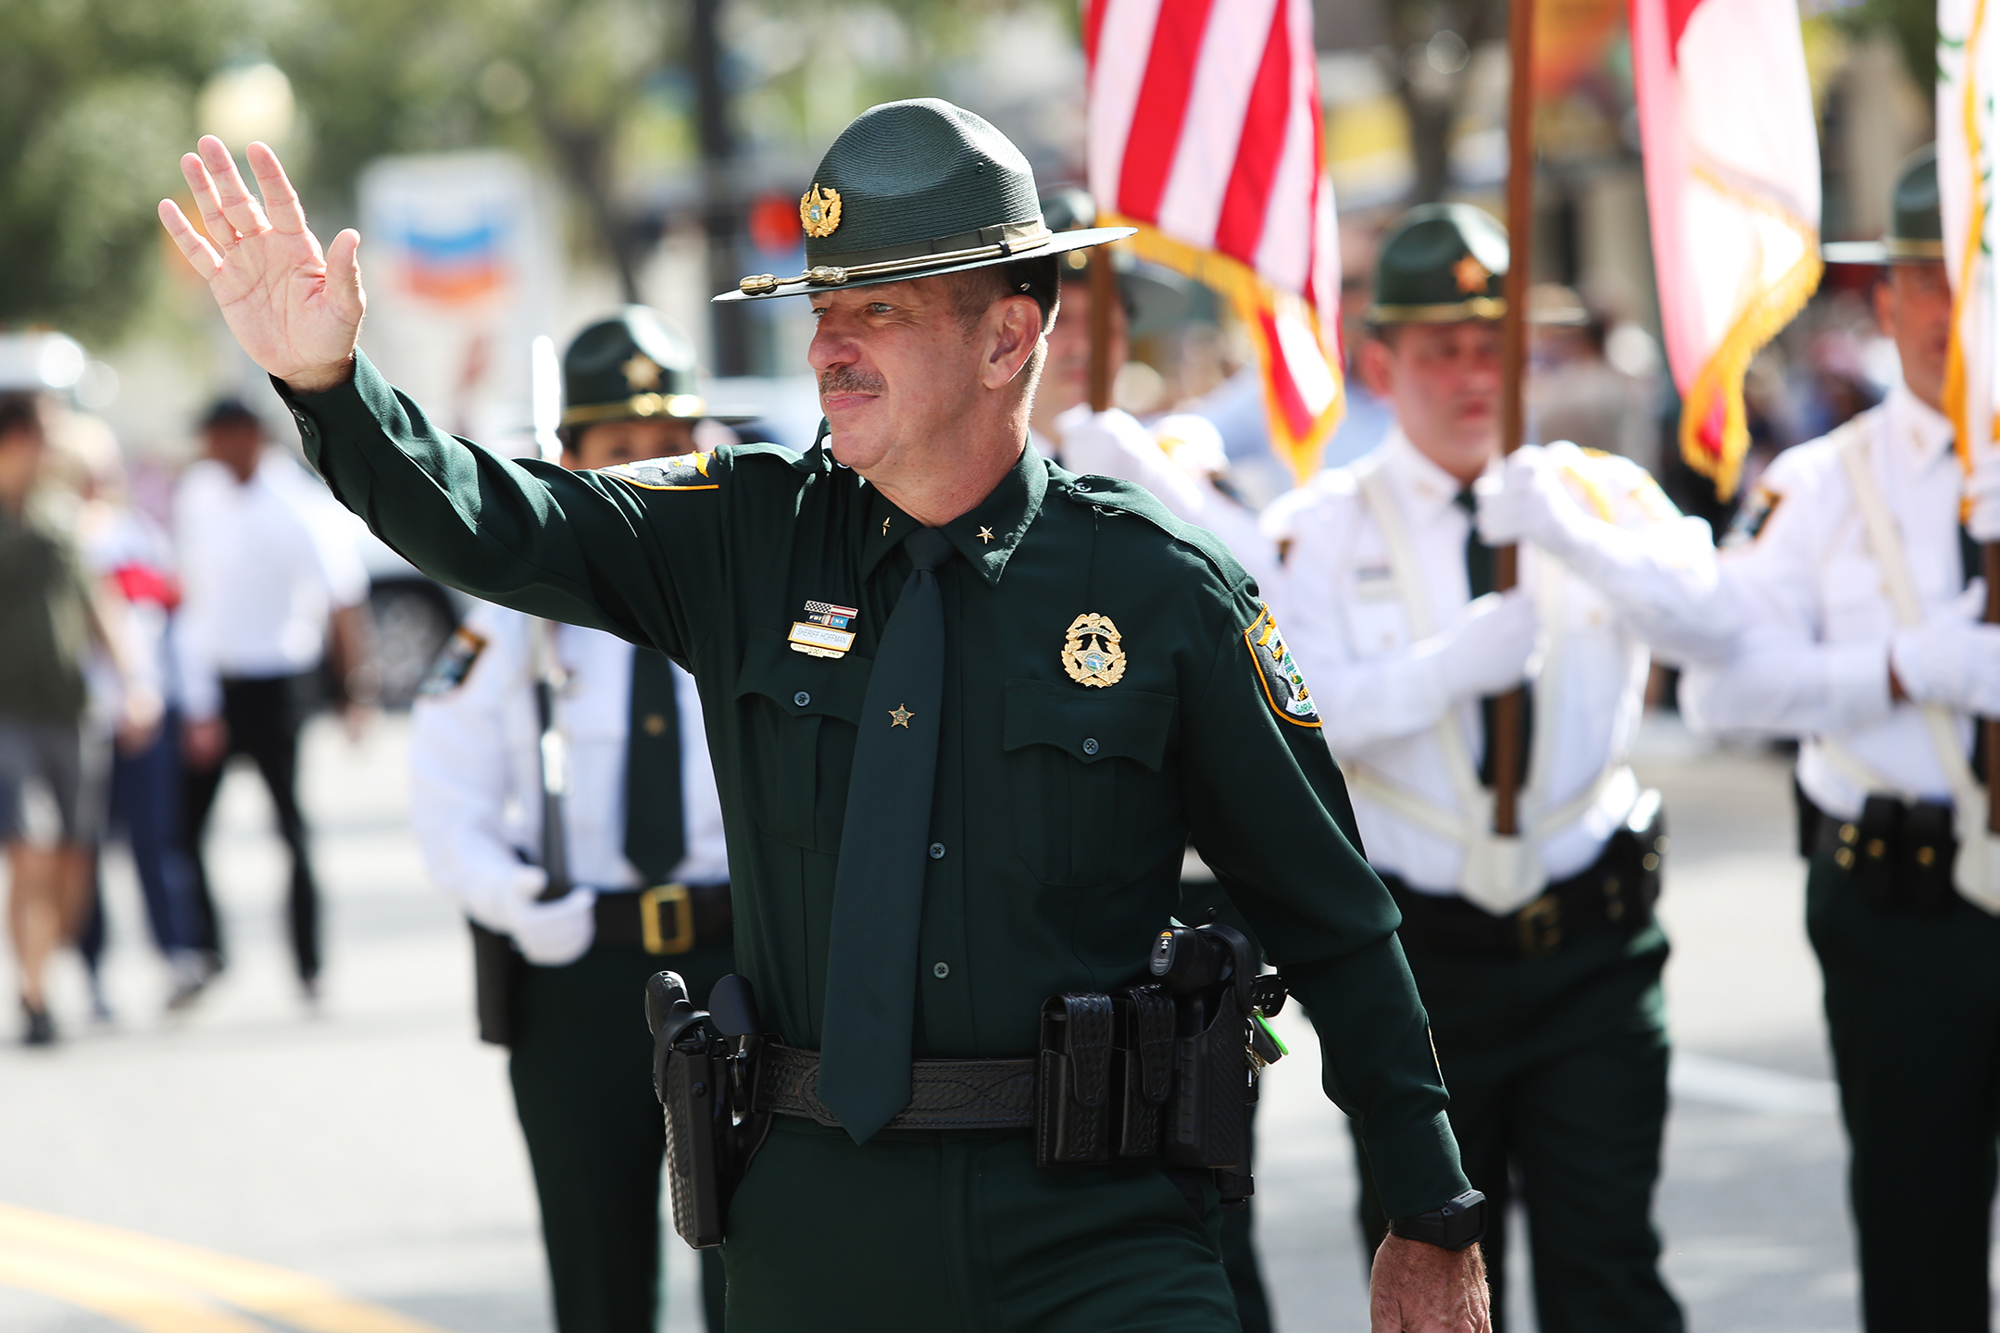 Sarasota County Sheriff Kurt Hoffman said his department will continue its show of force despite escalating prices of fuel and ammunition, among other expenses. (File photo)